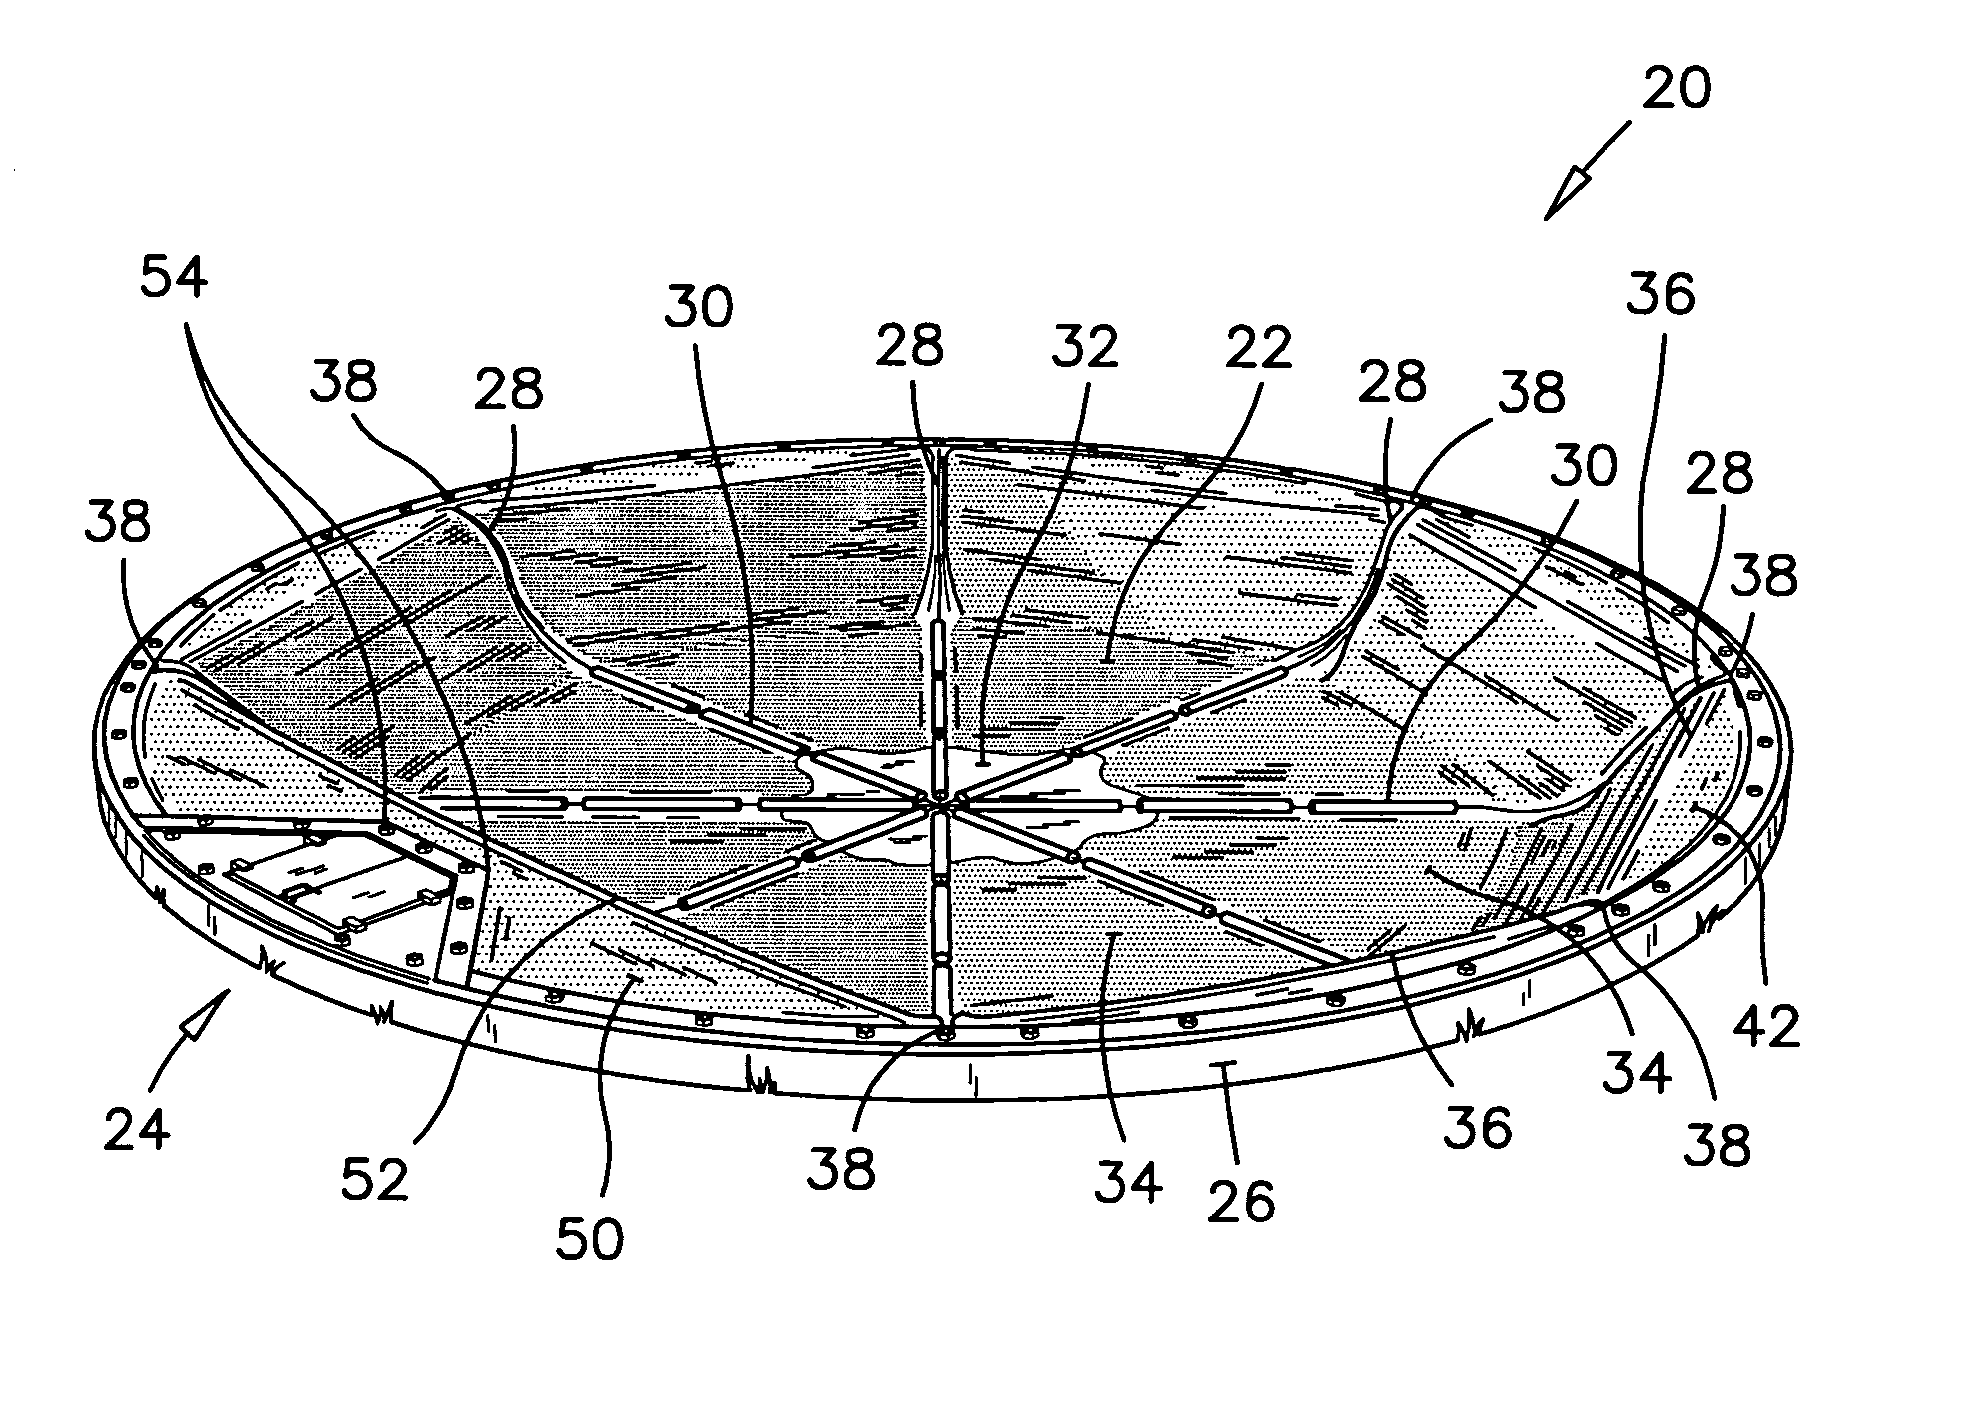 Membrane-covered reservoir having a hatchway therein